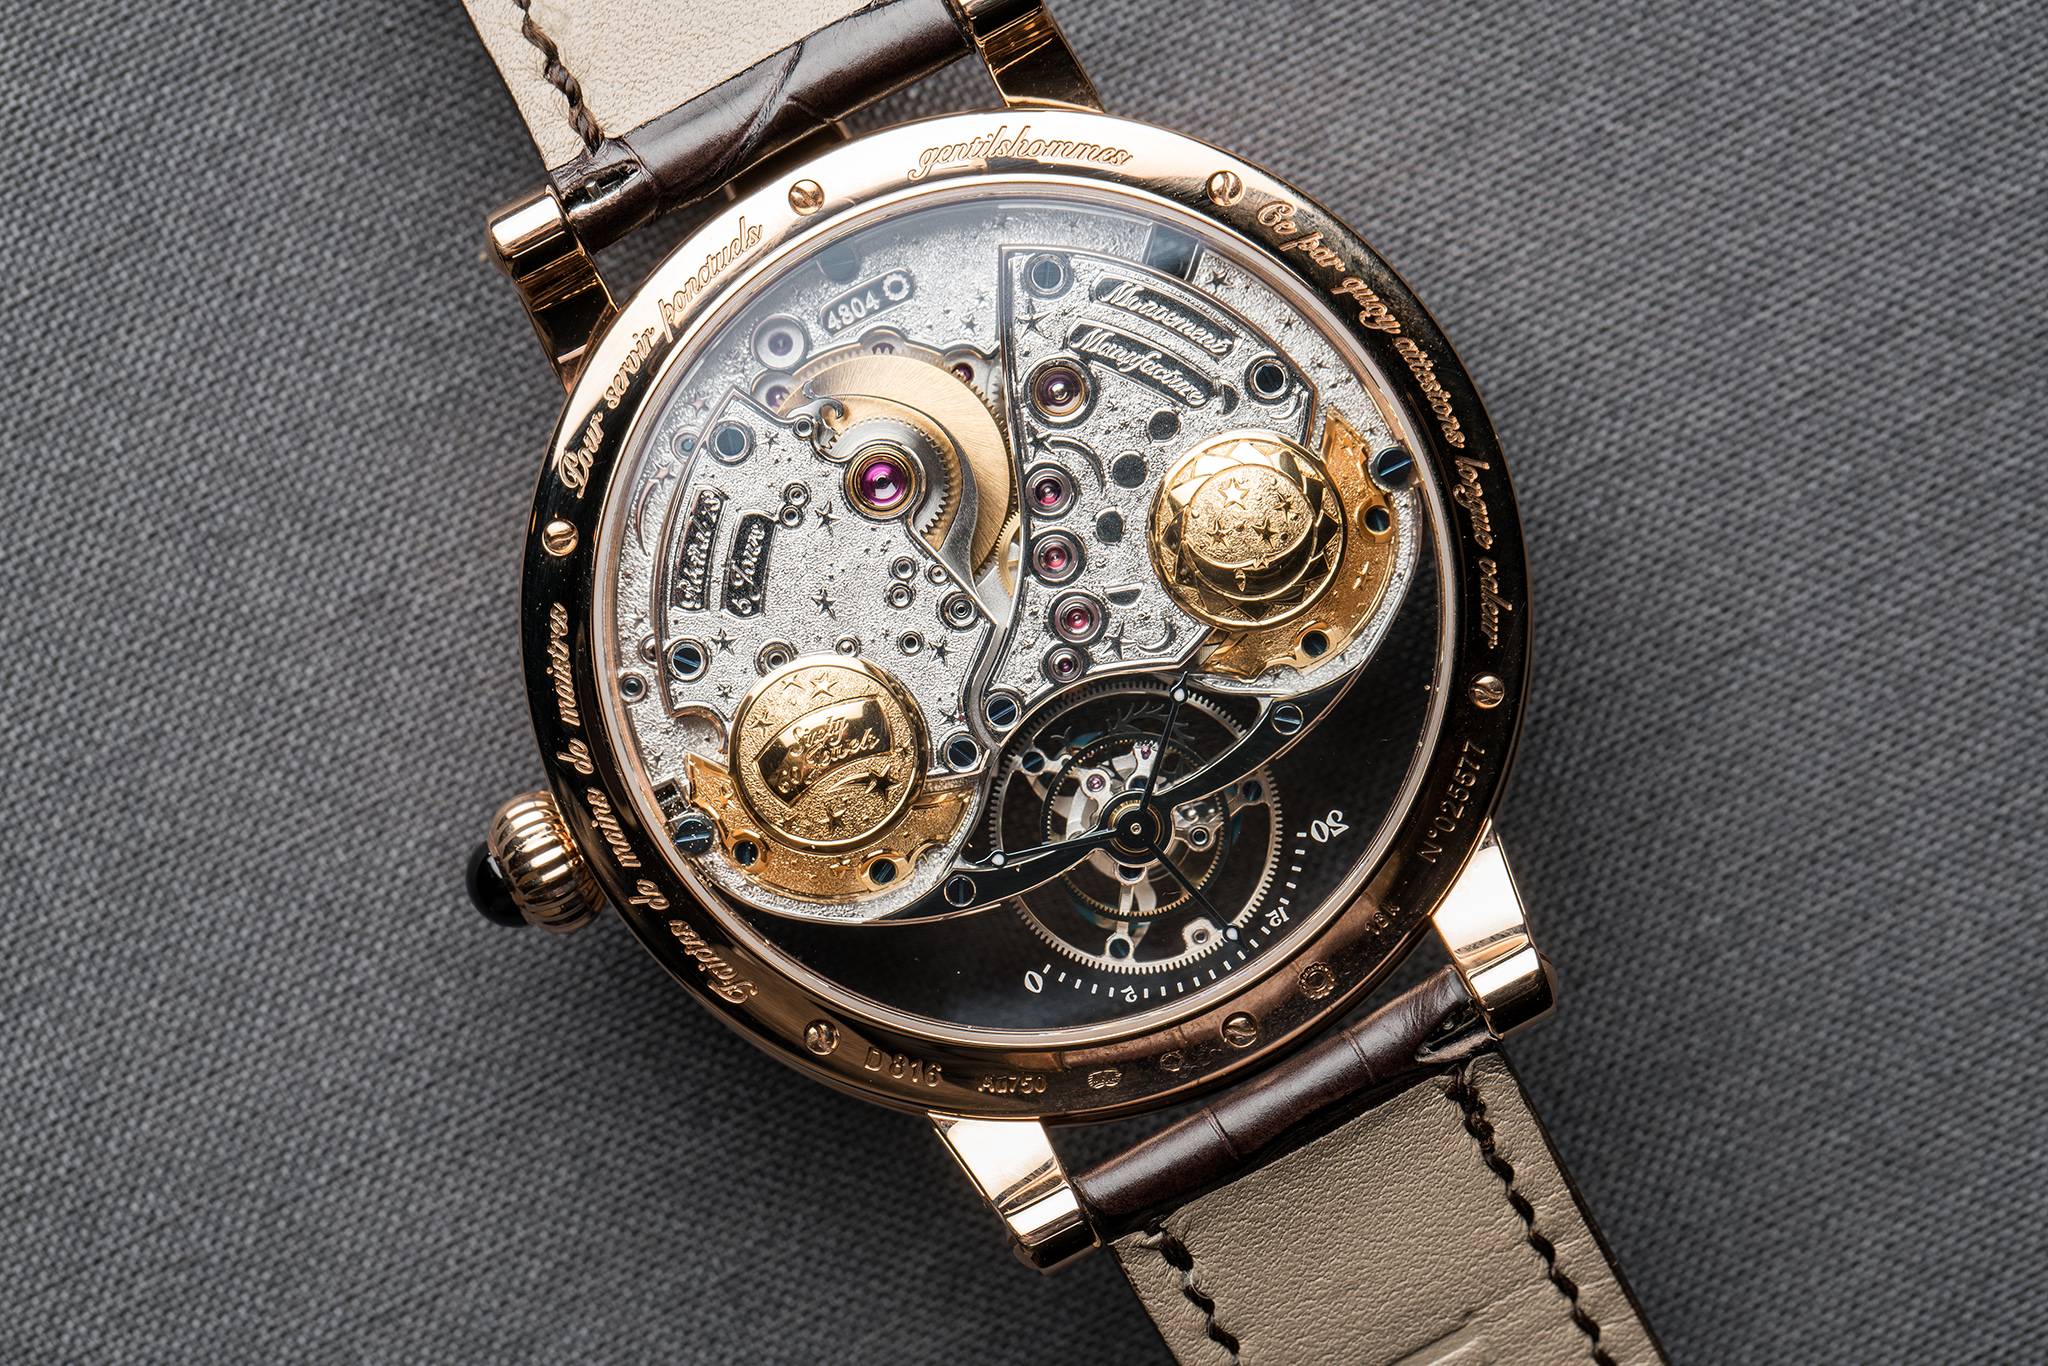 Introducing The Bovet Récital 18 - Shooting Star Watch